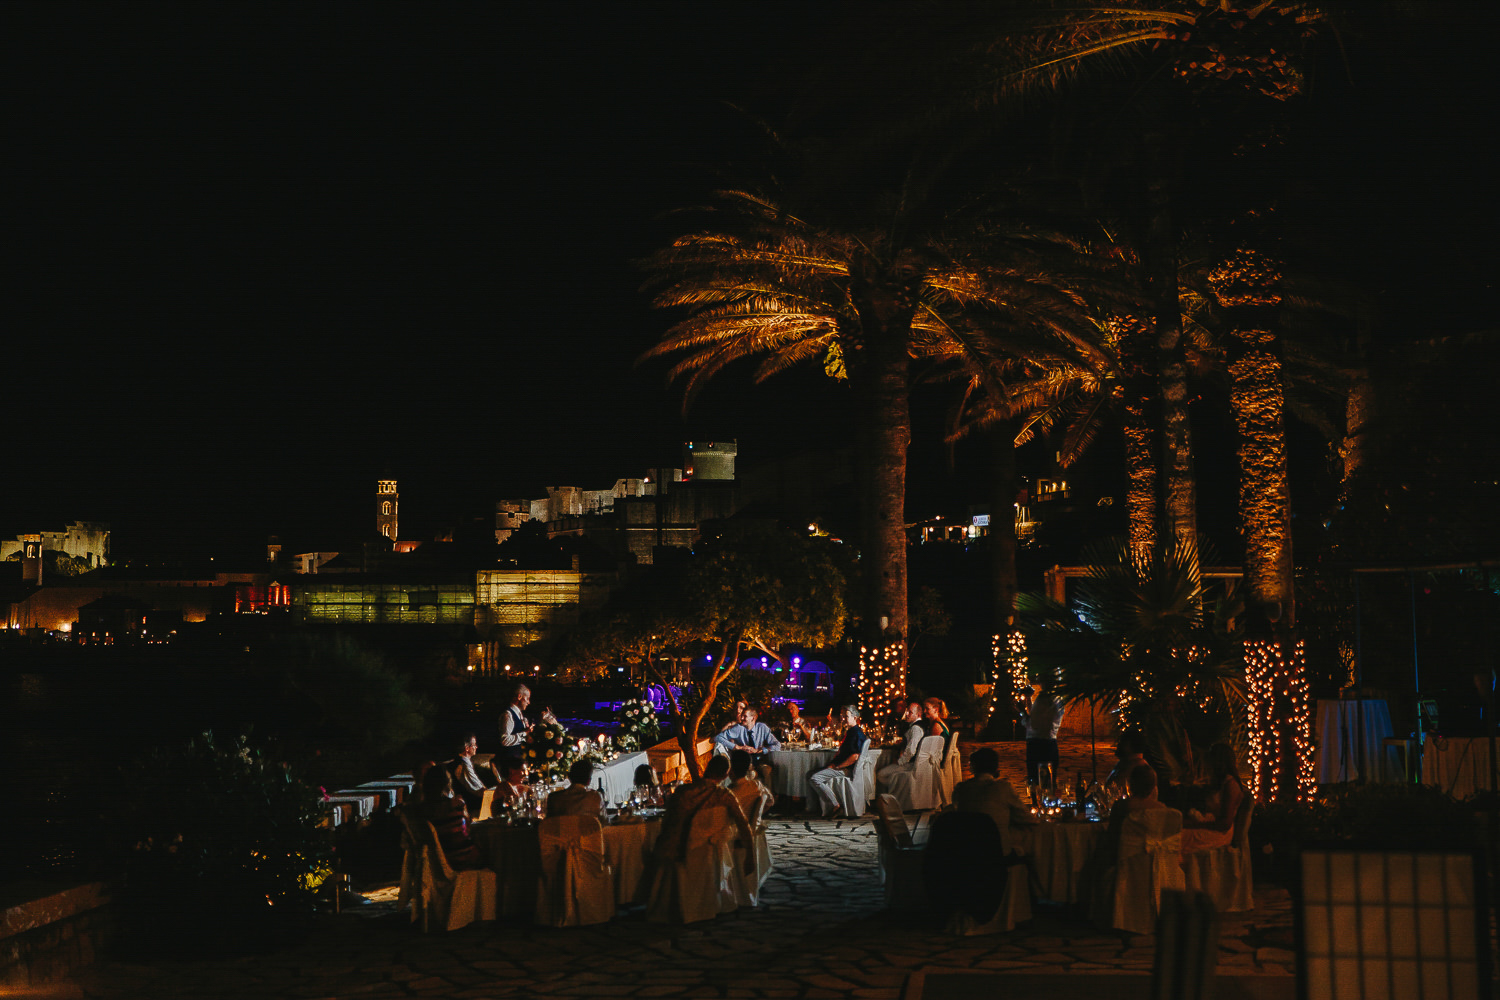 Night time, wedding reception, wedding tables, wedding guests, palm trees, the sea